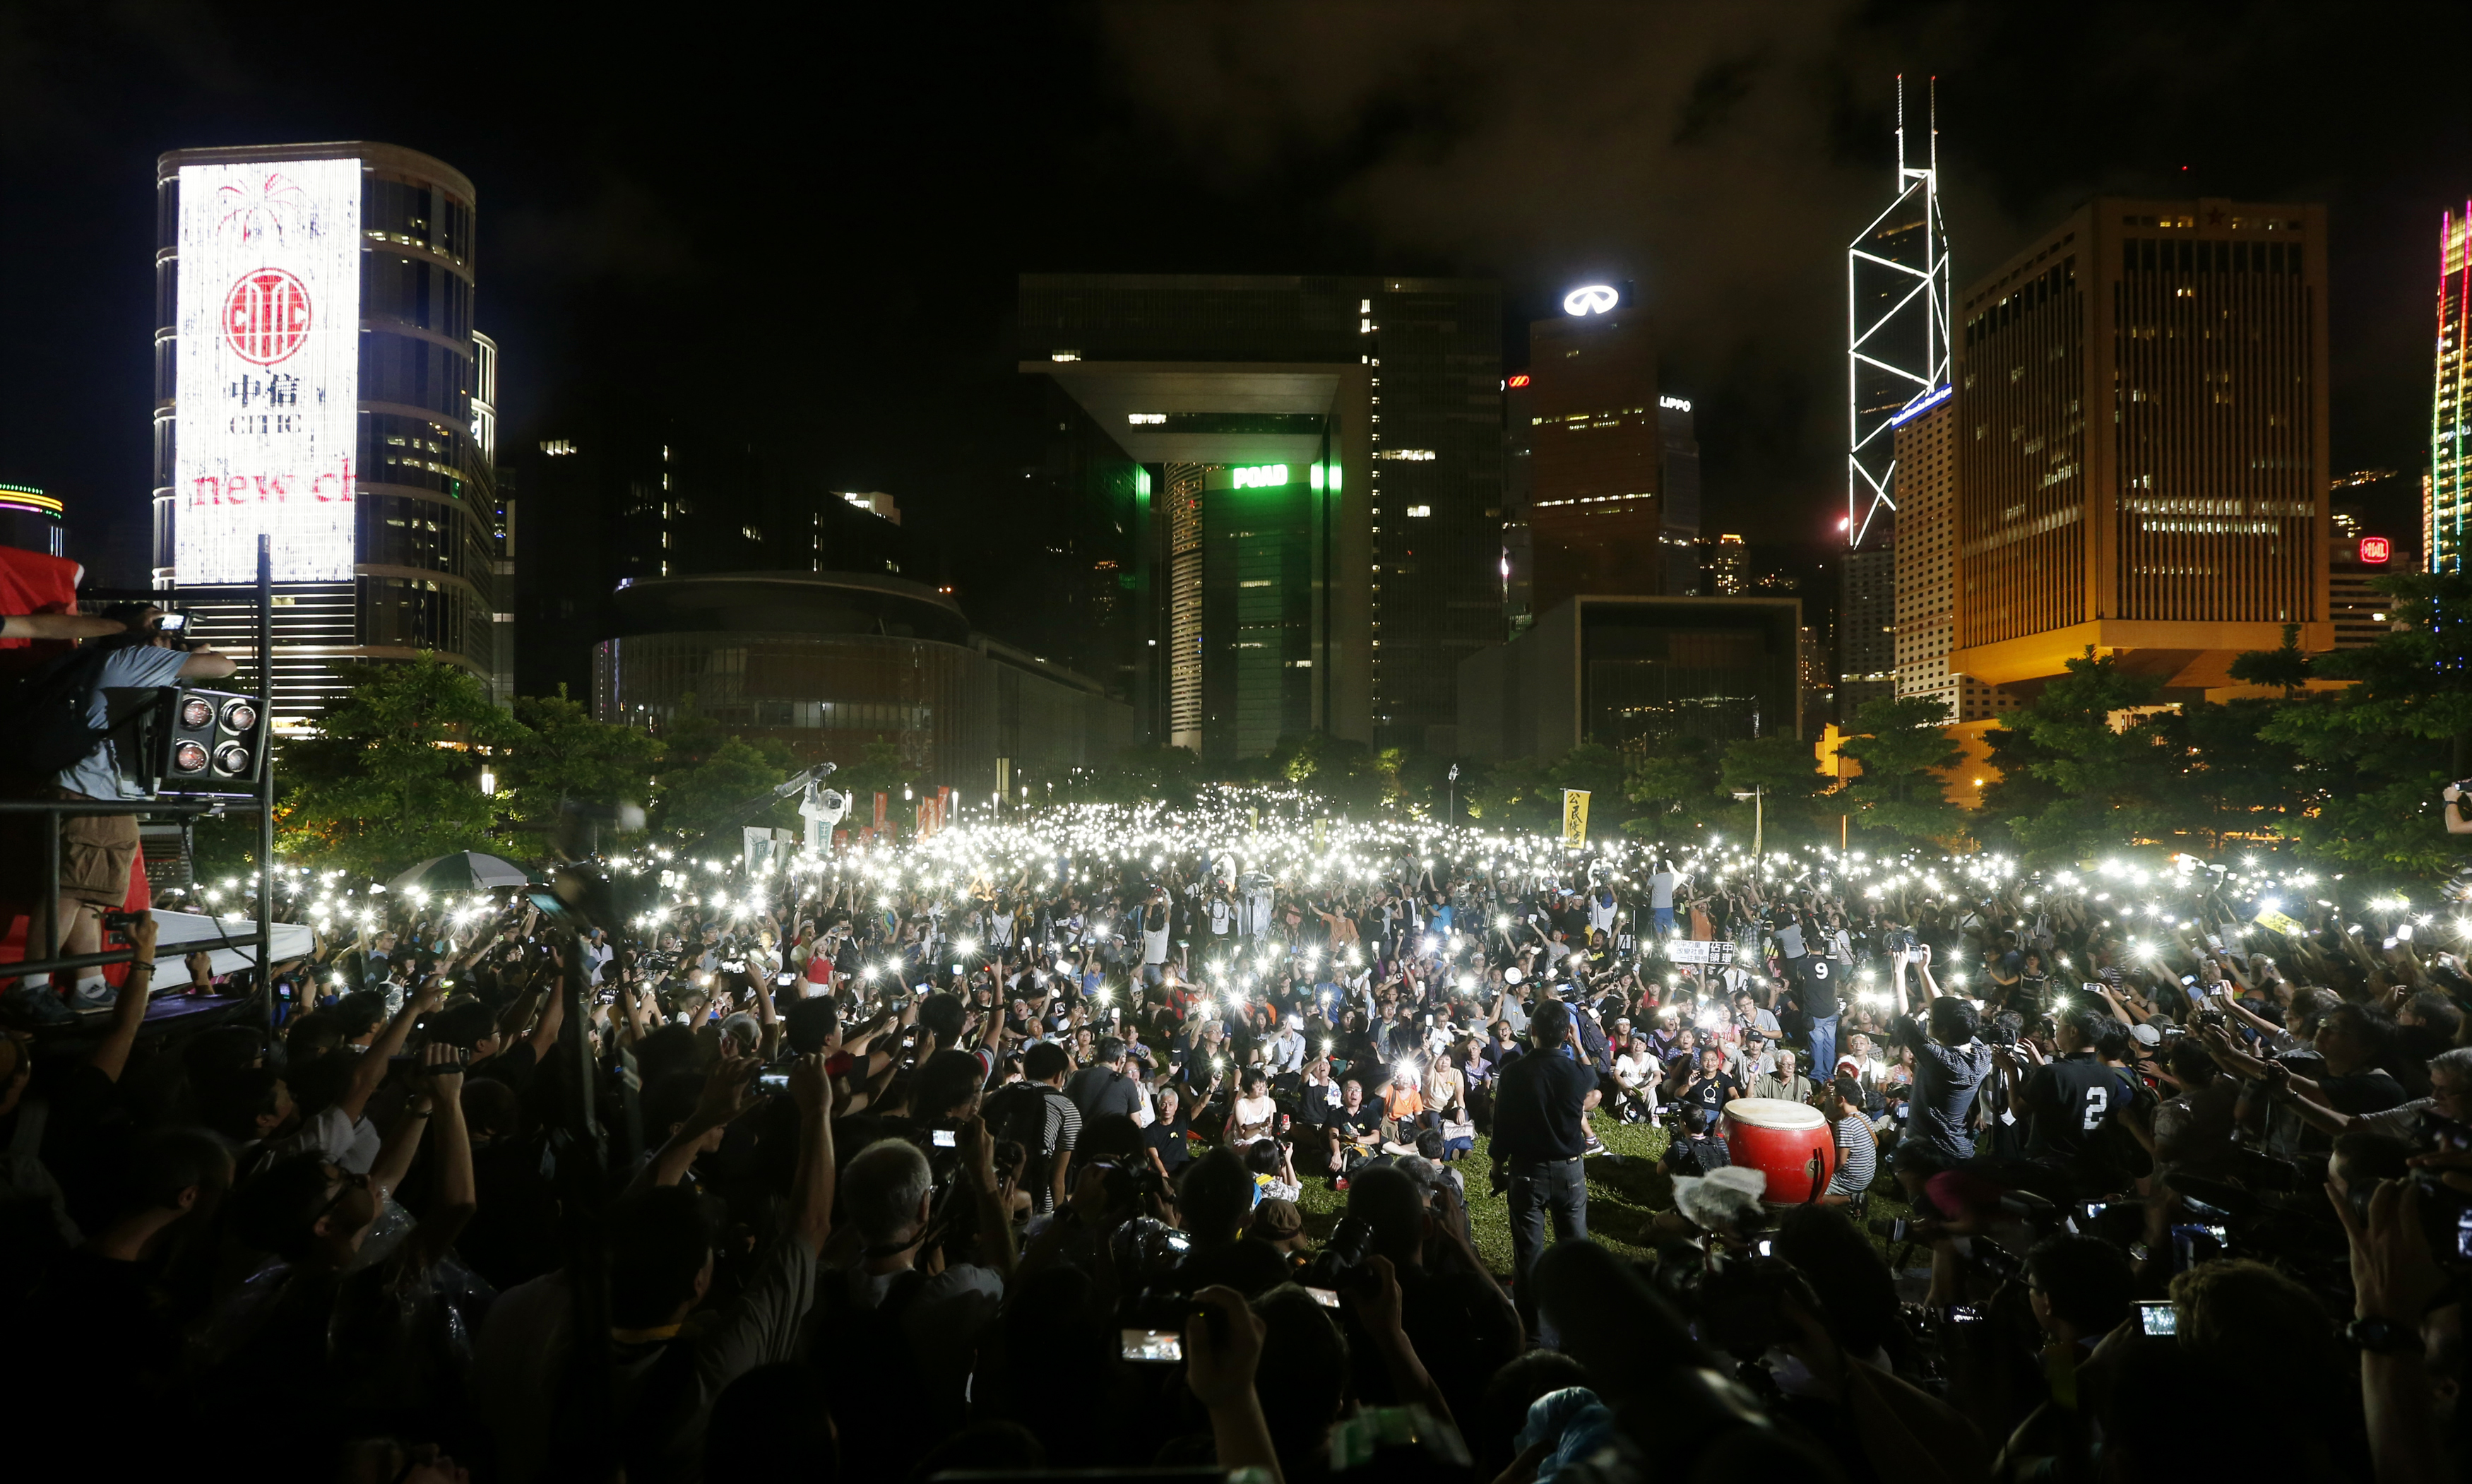 Pro-democracy protesters switch on their mobile phones during a campaign to kick off the Occupy Central civil-disobedience event near the Central financial district in Hong Kong at Aug. 31, 2014 (Bobby Yip—Reuters)